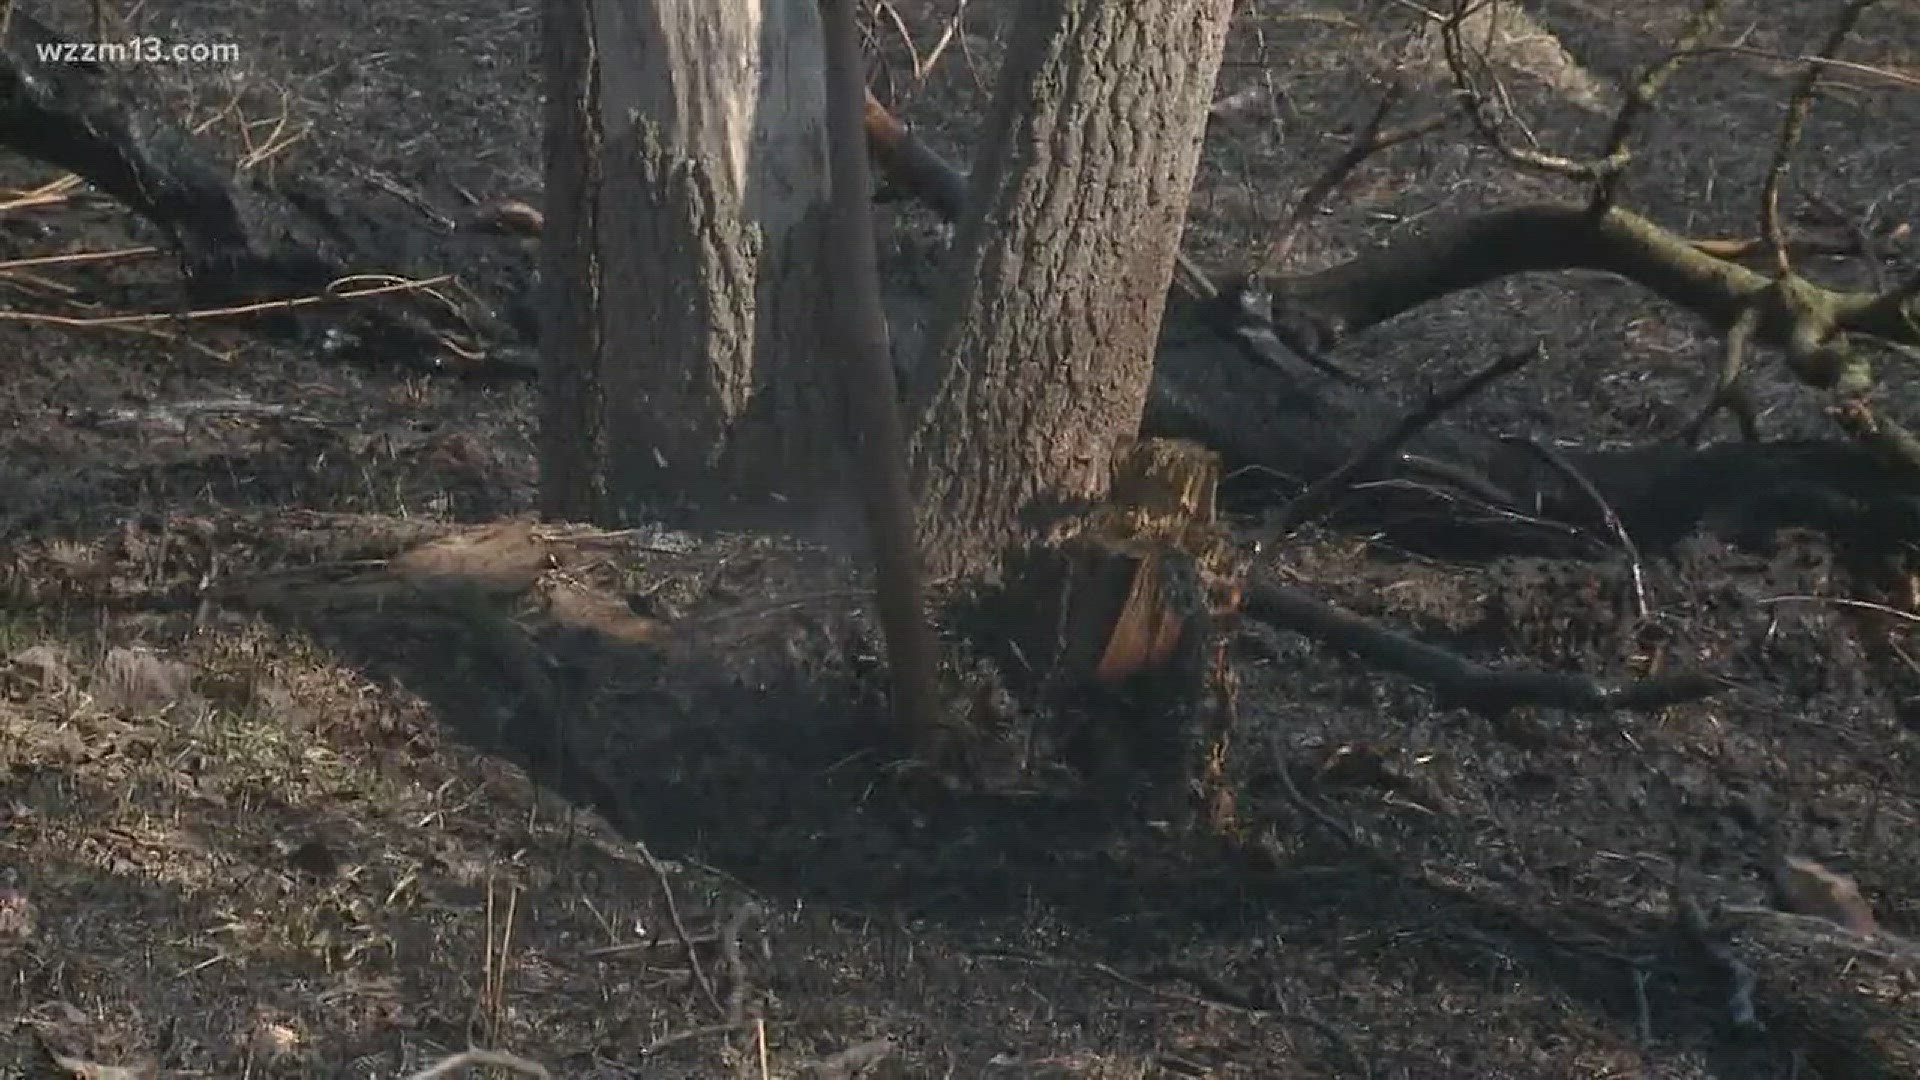 Dry conditions lead to burning bans in west Michigan